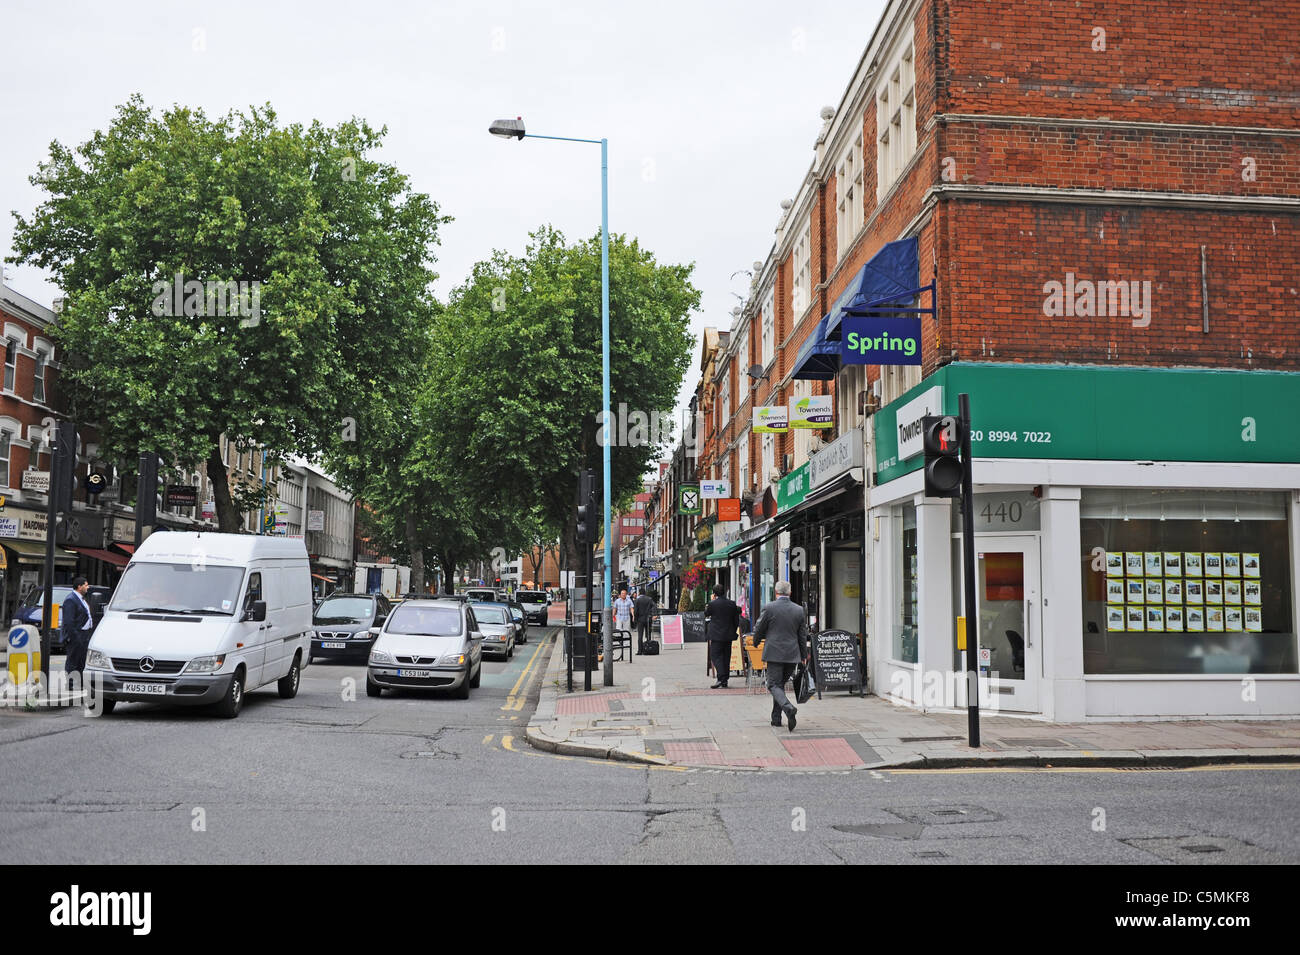 Traffic stops at lights in Chiswick High Road West London UK Stock Photo